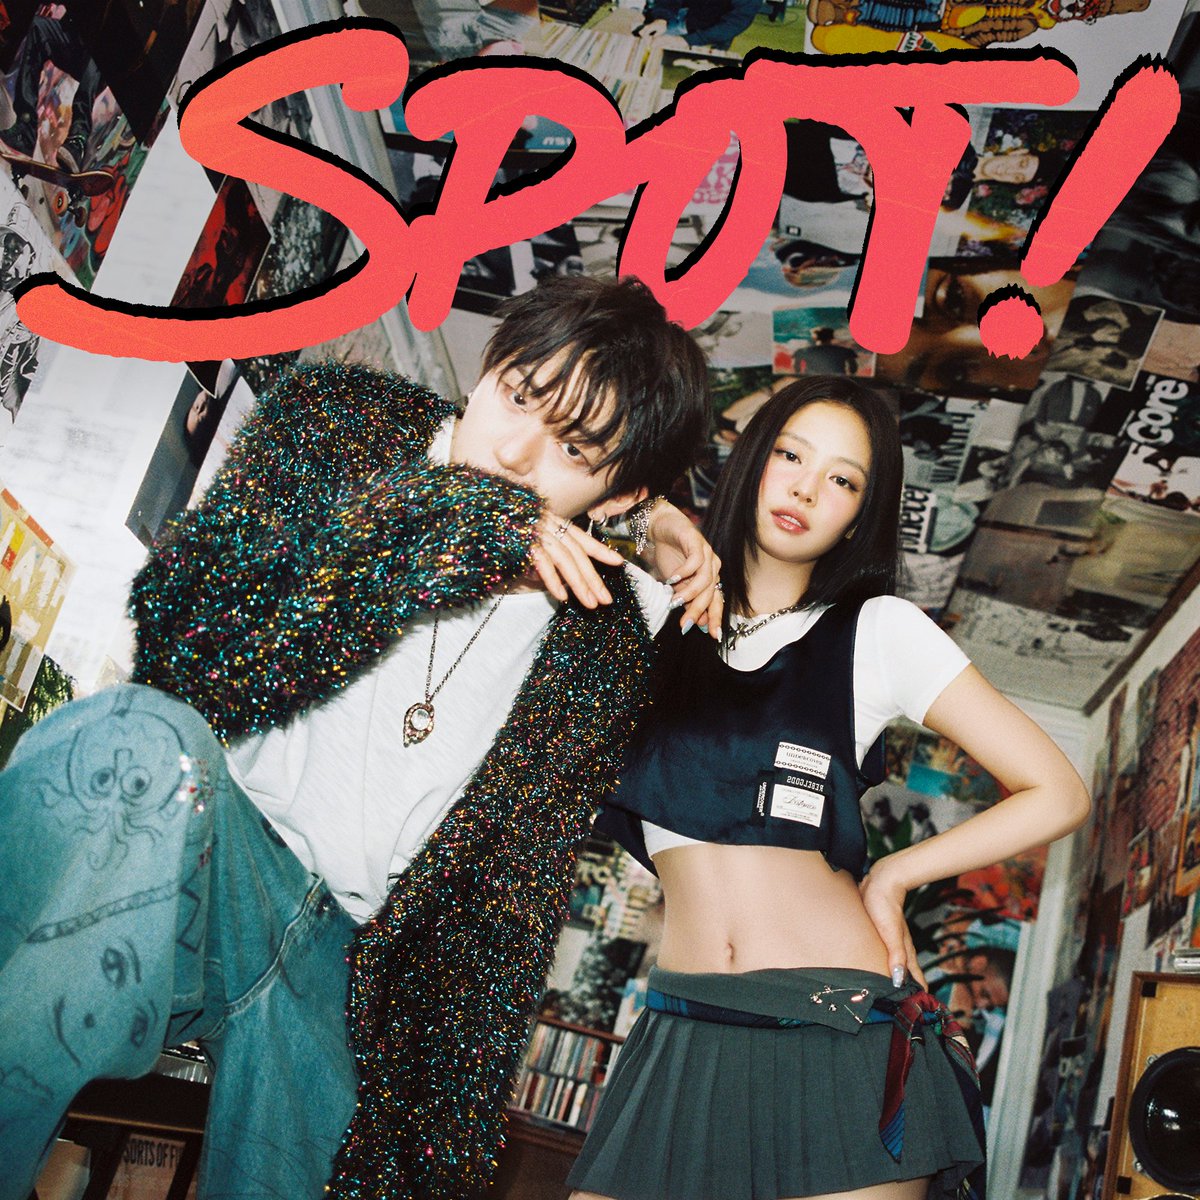 #Zico and #Jennie hit the spot! @zico_koz's latest release featuring @BLACKPINK's Jennie, 'SPOT!,' ranked at No. 24 on the Global 200 @billboardcharts. The song immediately topped the World Digital Song Sales chart upon its release, proving the artists' immense popularity.